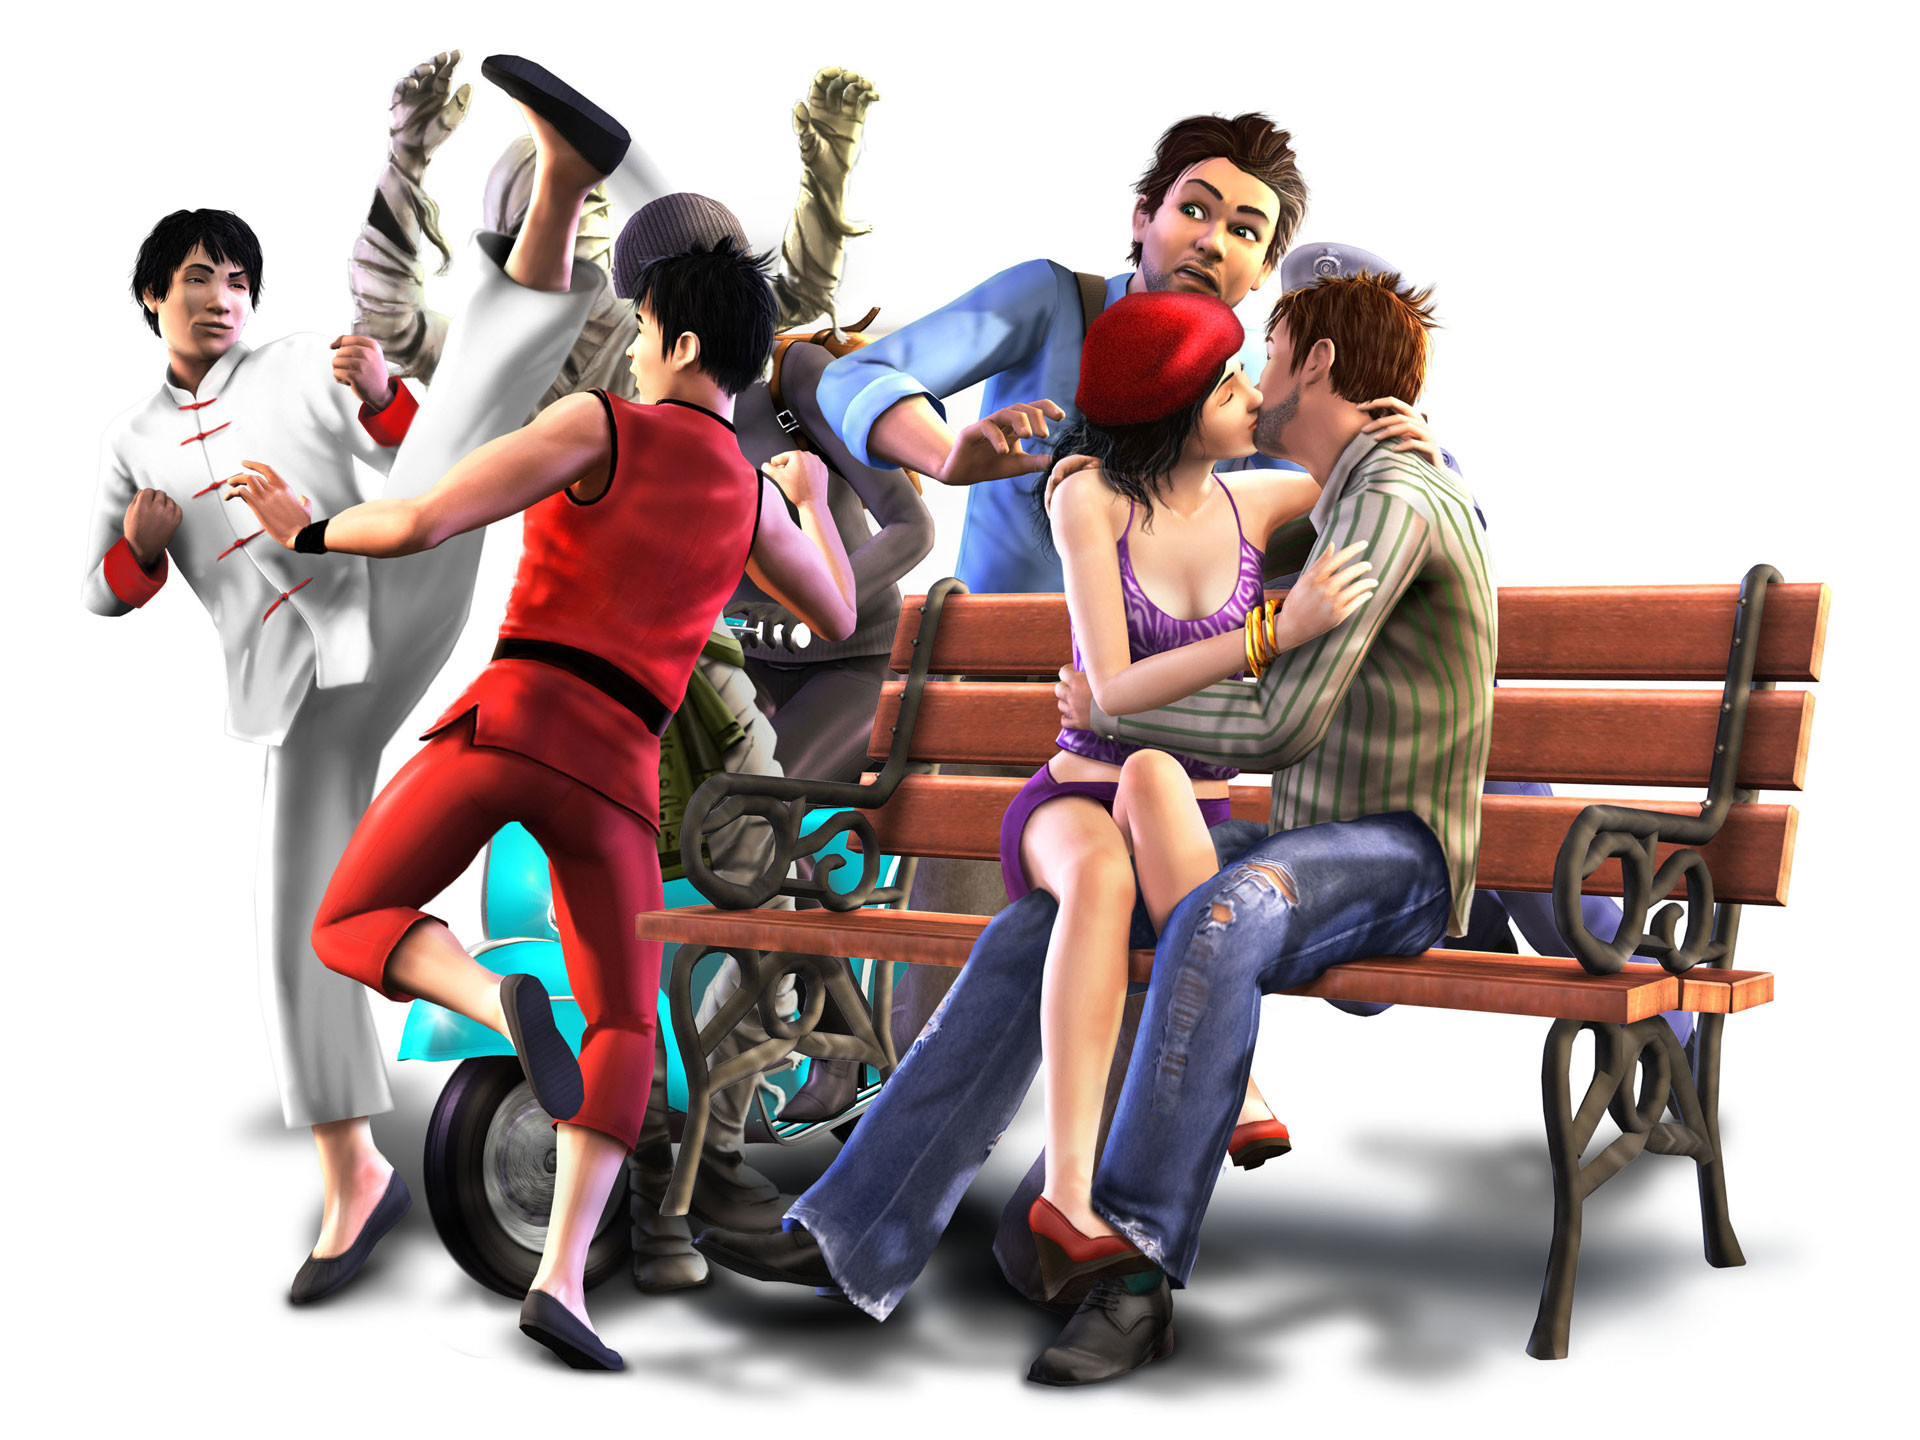 1920x1440 The Sims 3 World Adventures